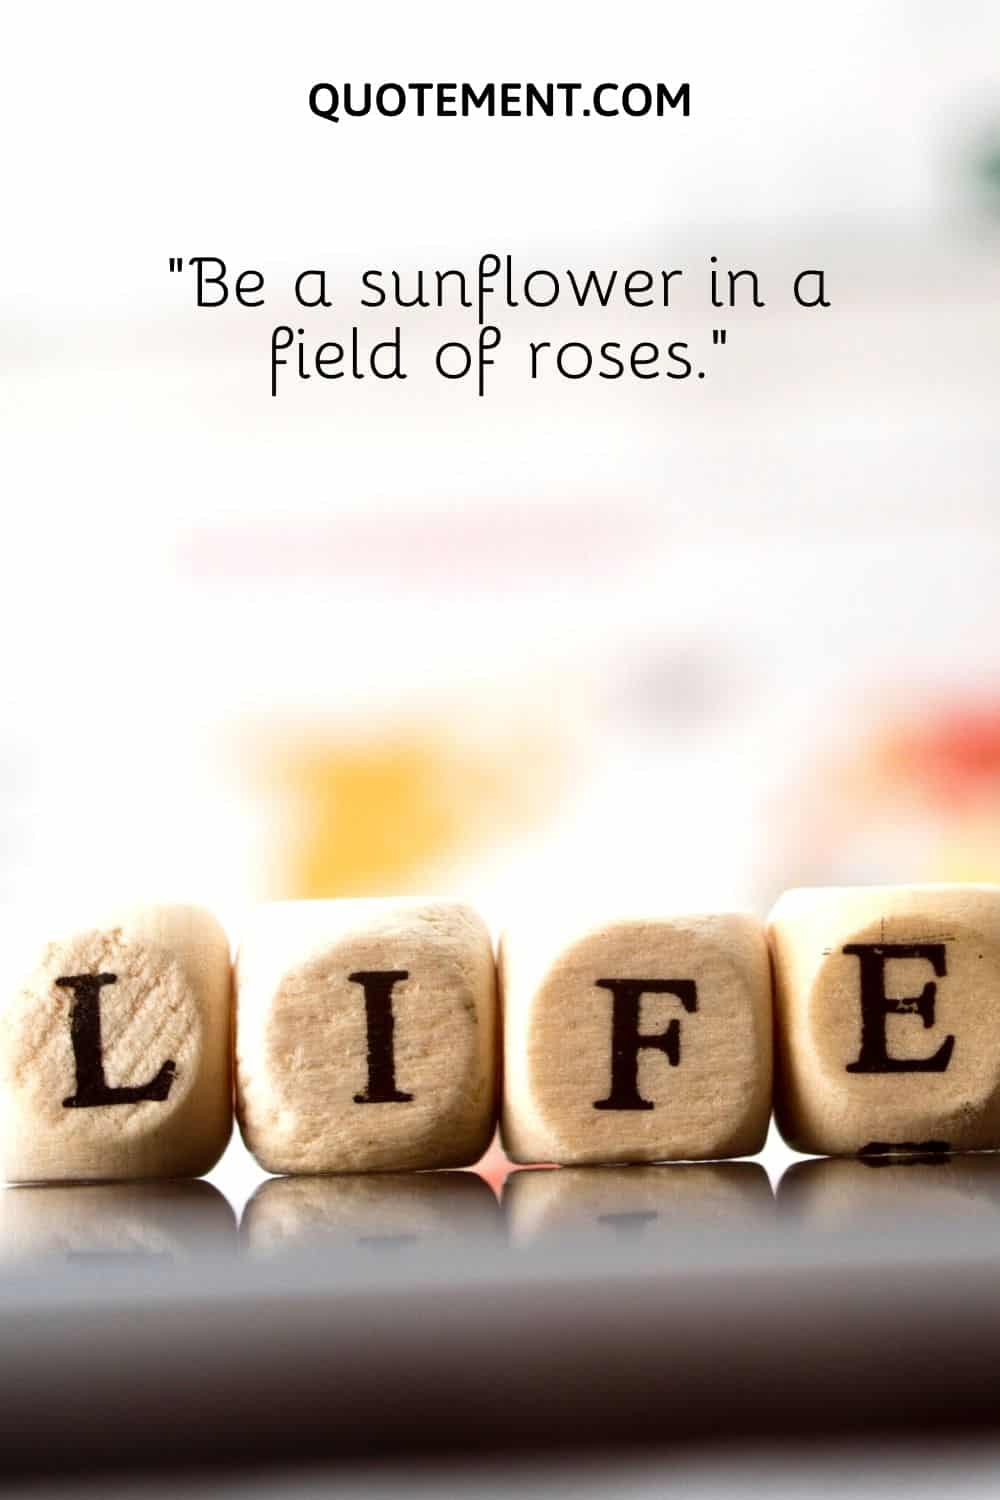 Be a sunflower in a field of roses